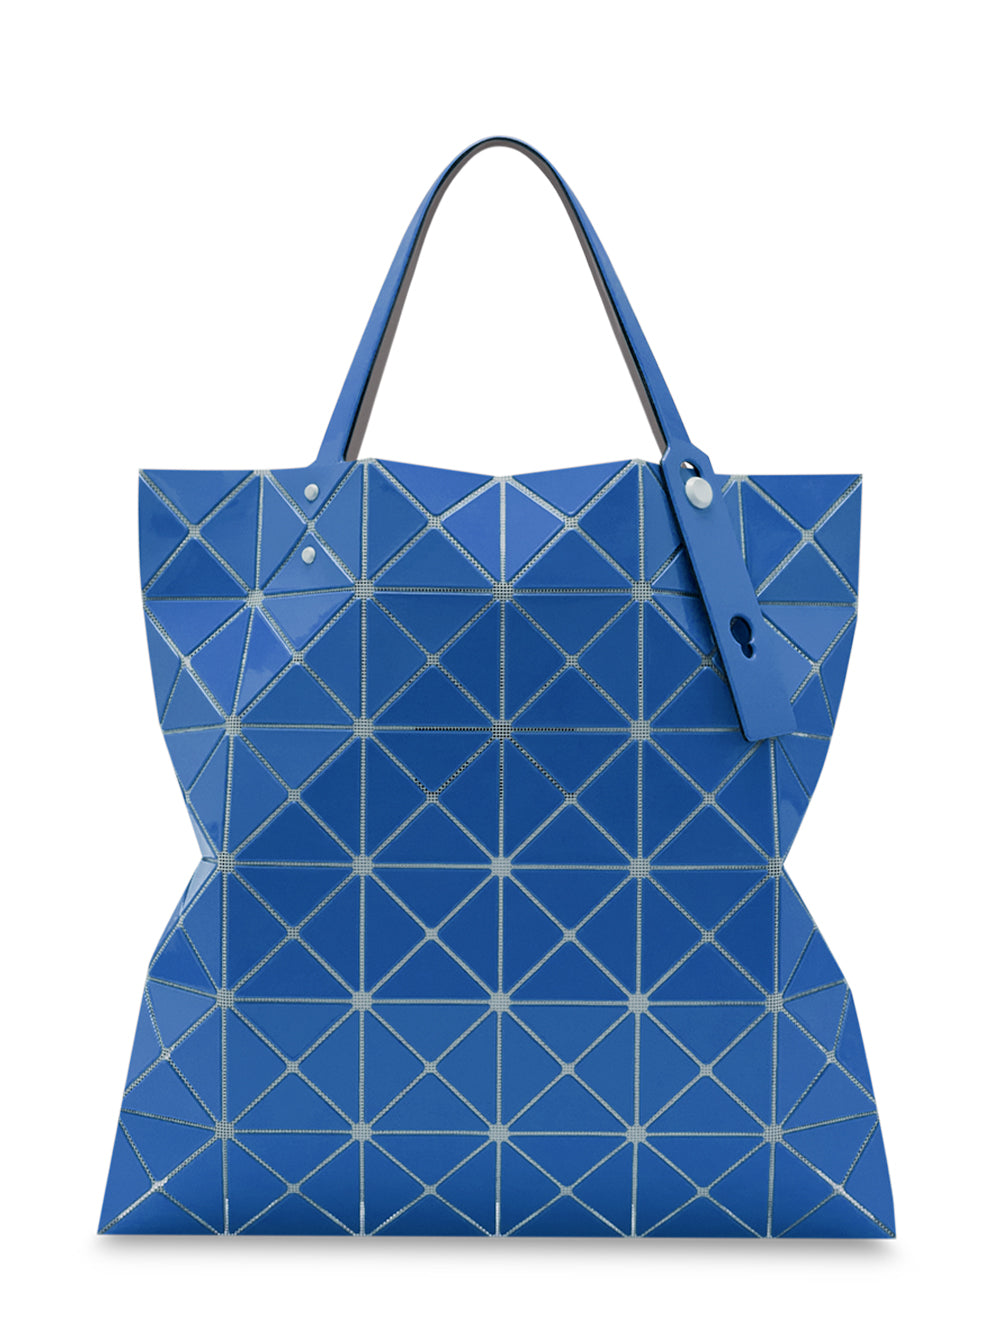 LUCENT GLOSS Tote (6*6) (Blue)